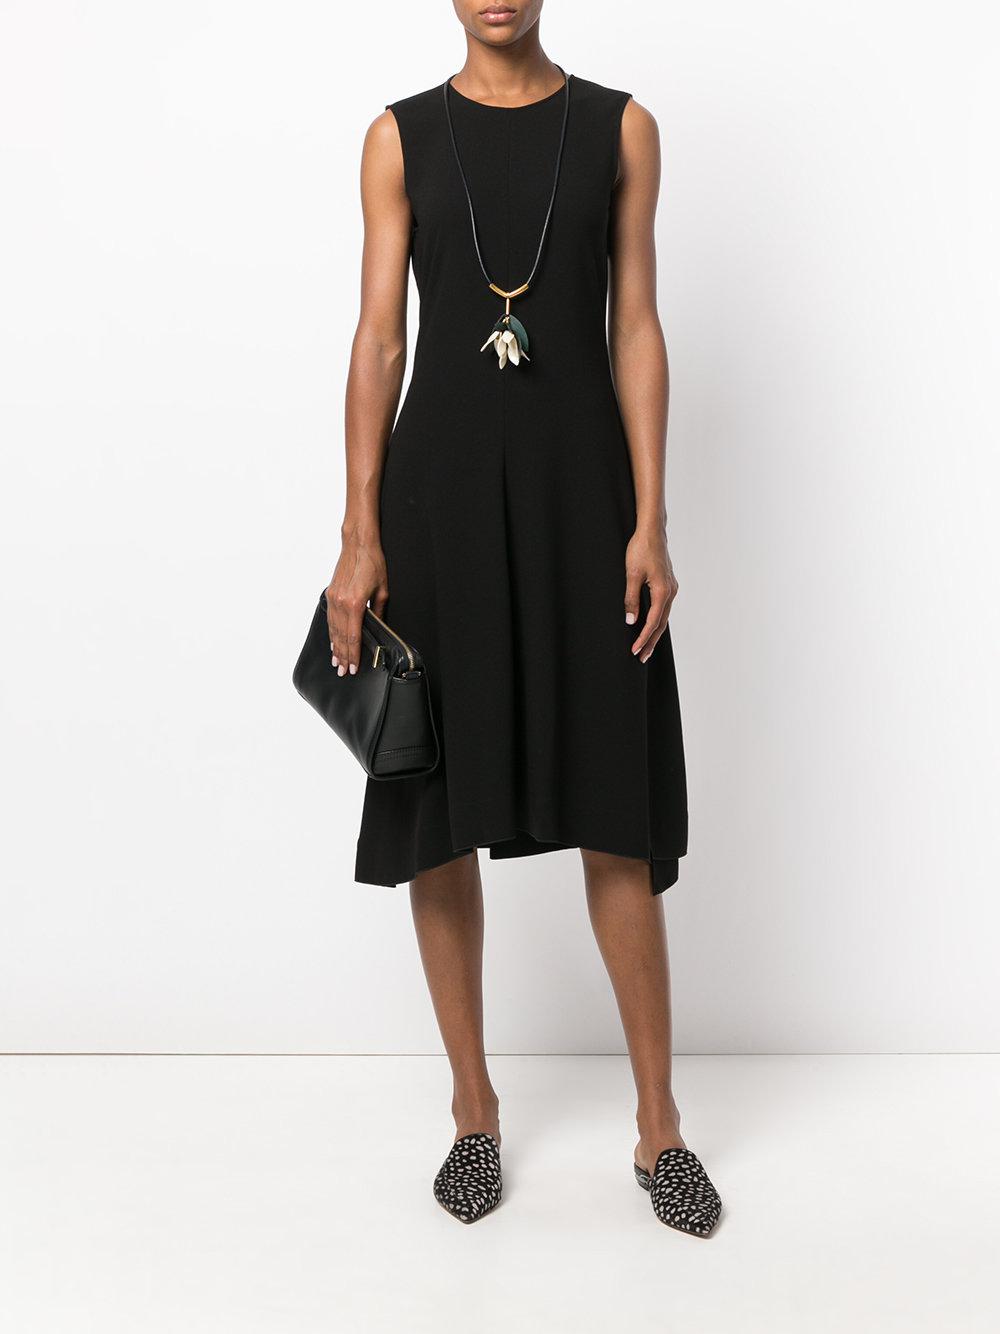 Lyst - Theory Flared Dress in Black